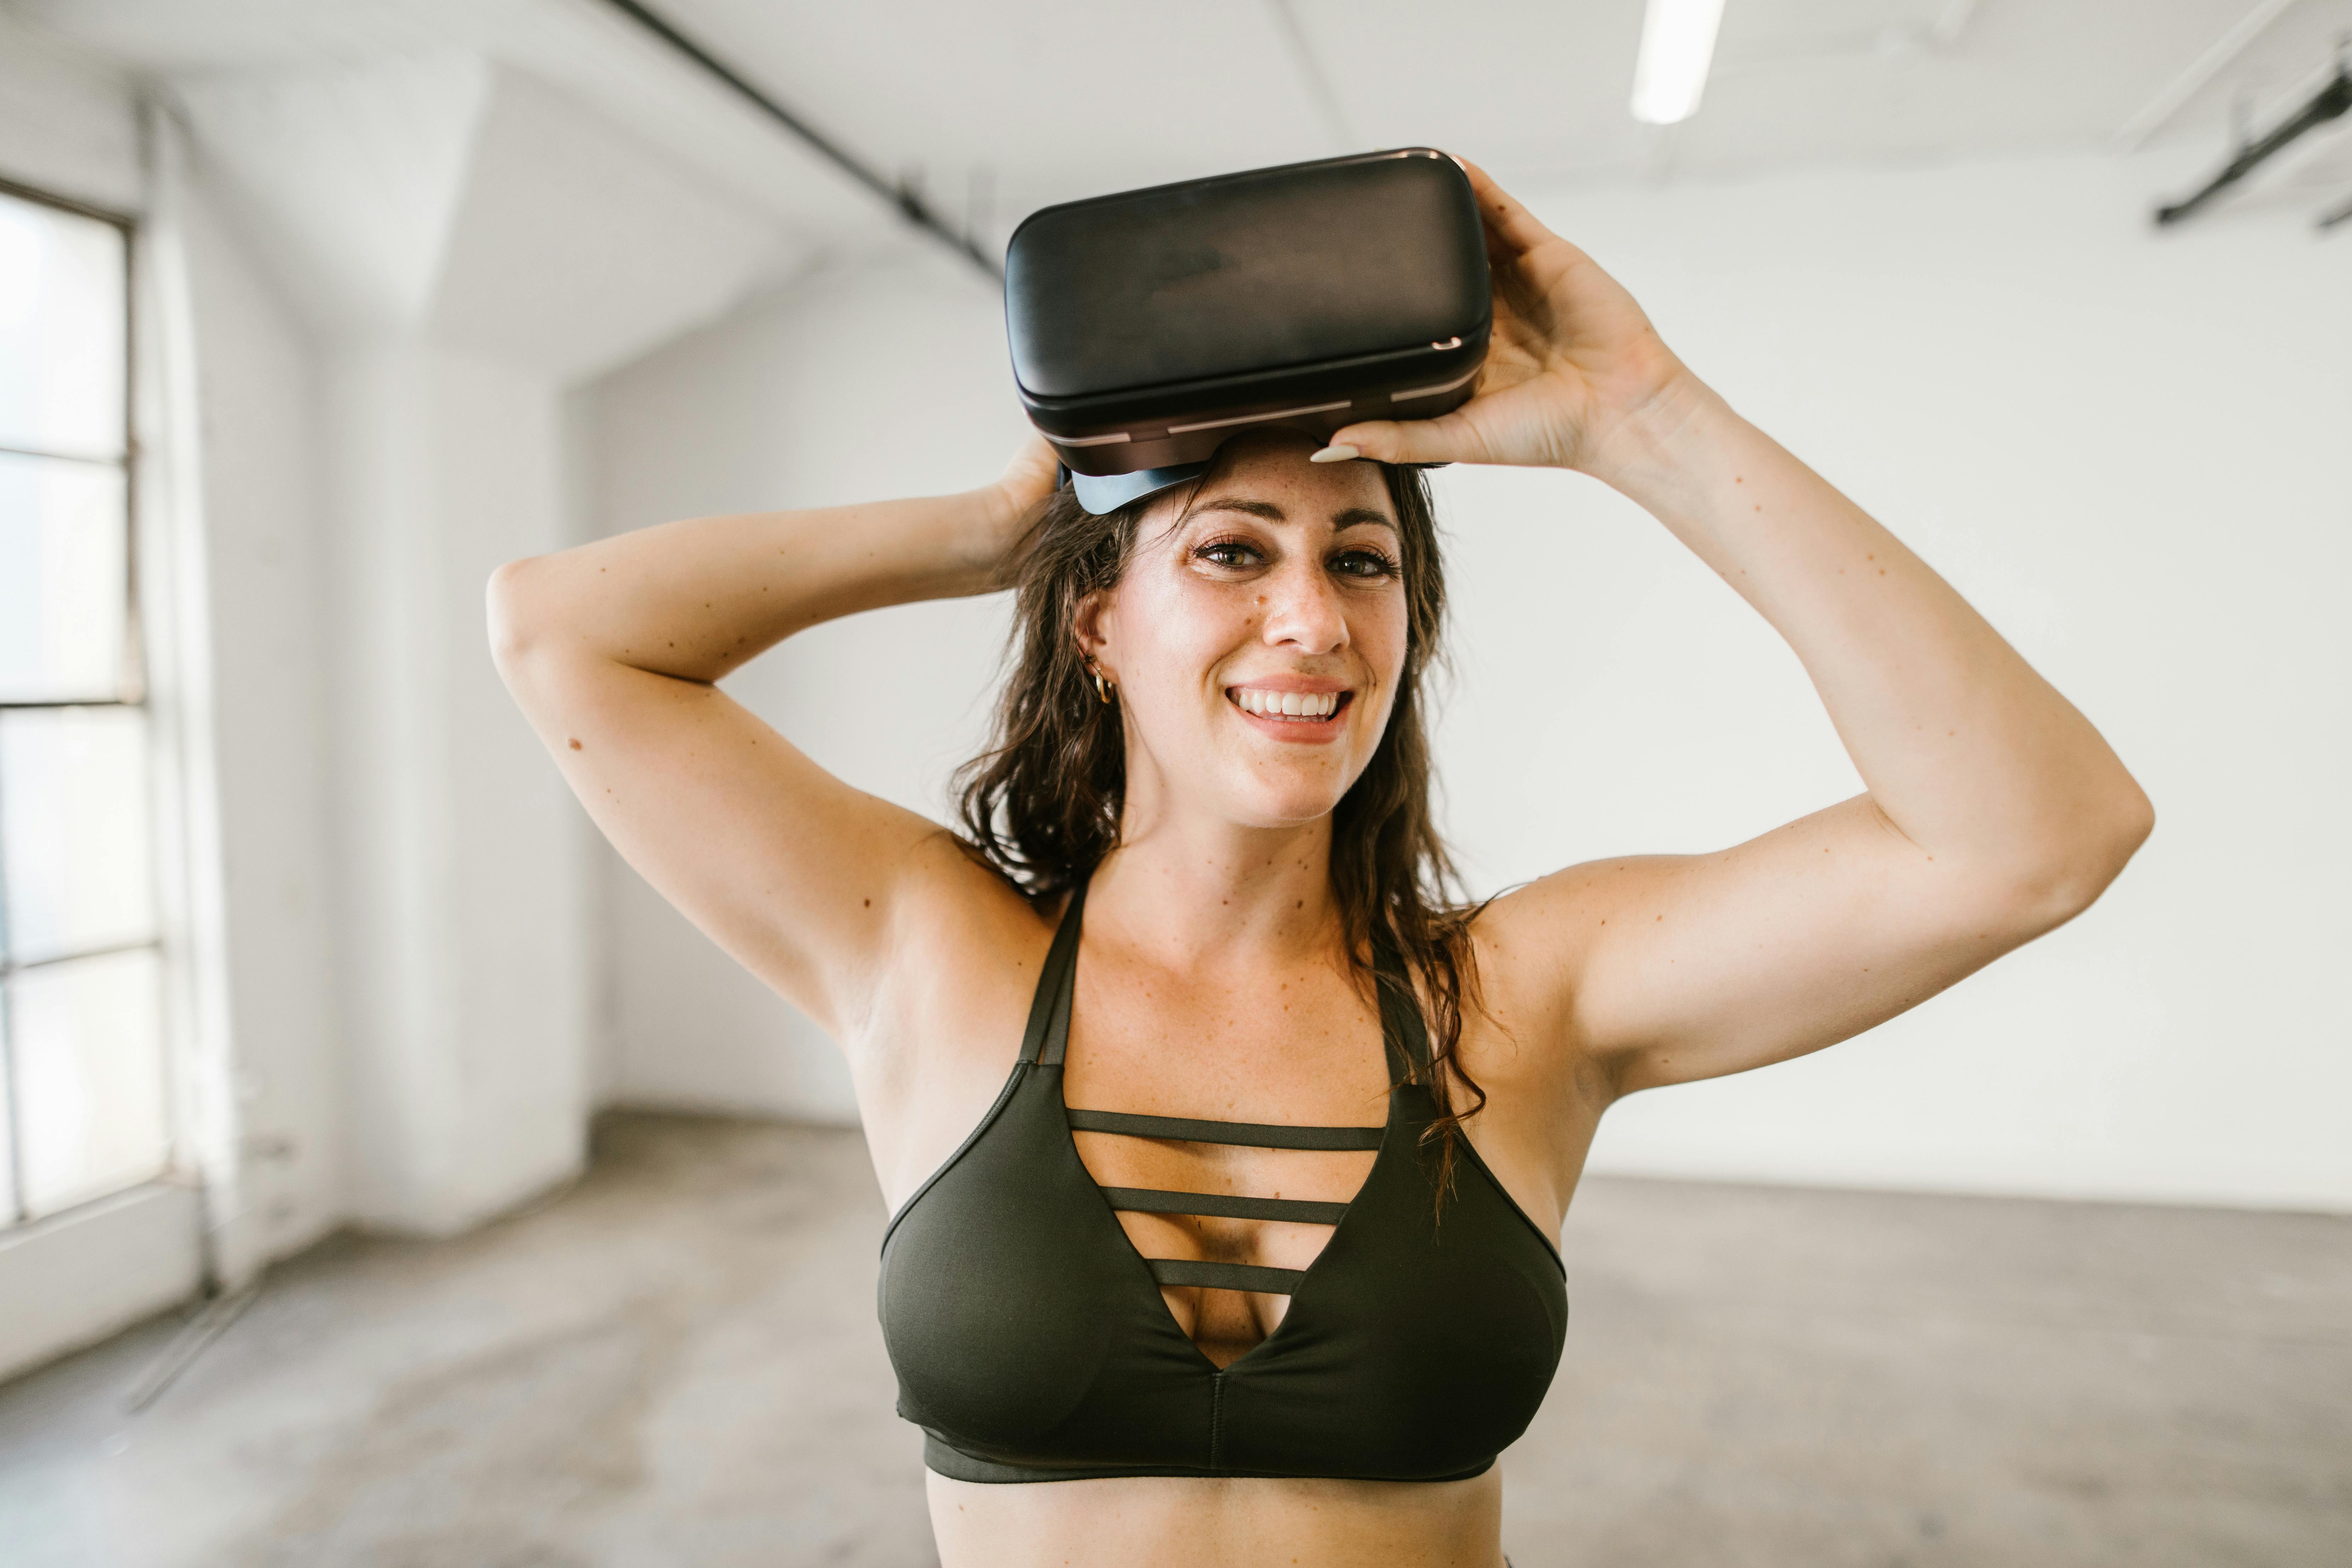 Woman in Sports Bra Holding a Virtual Reality Headset · Free Stock Photo